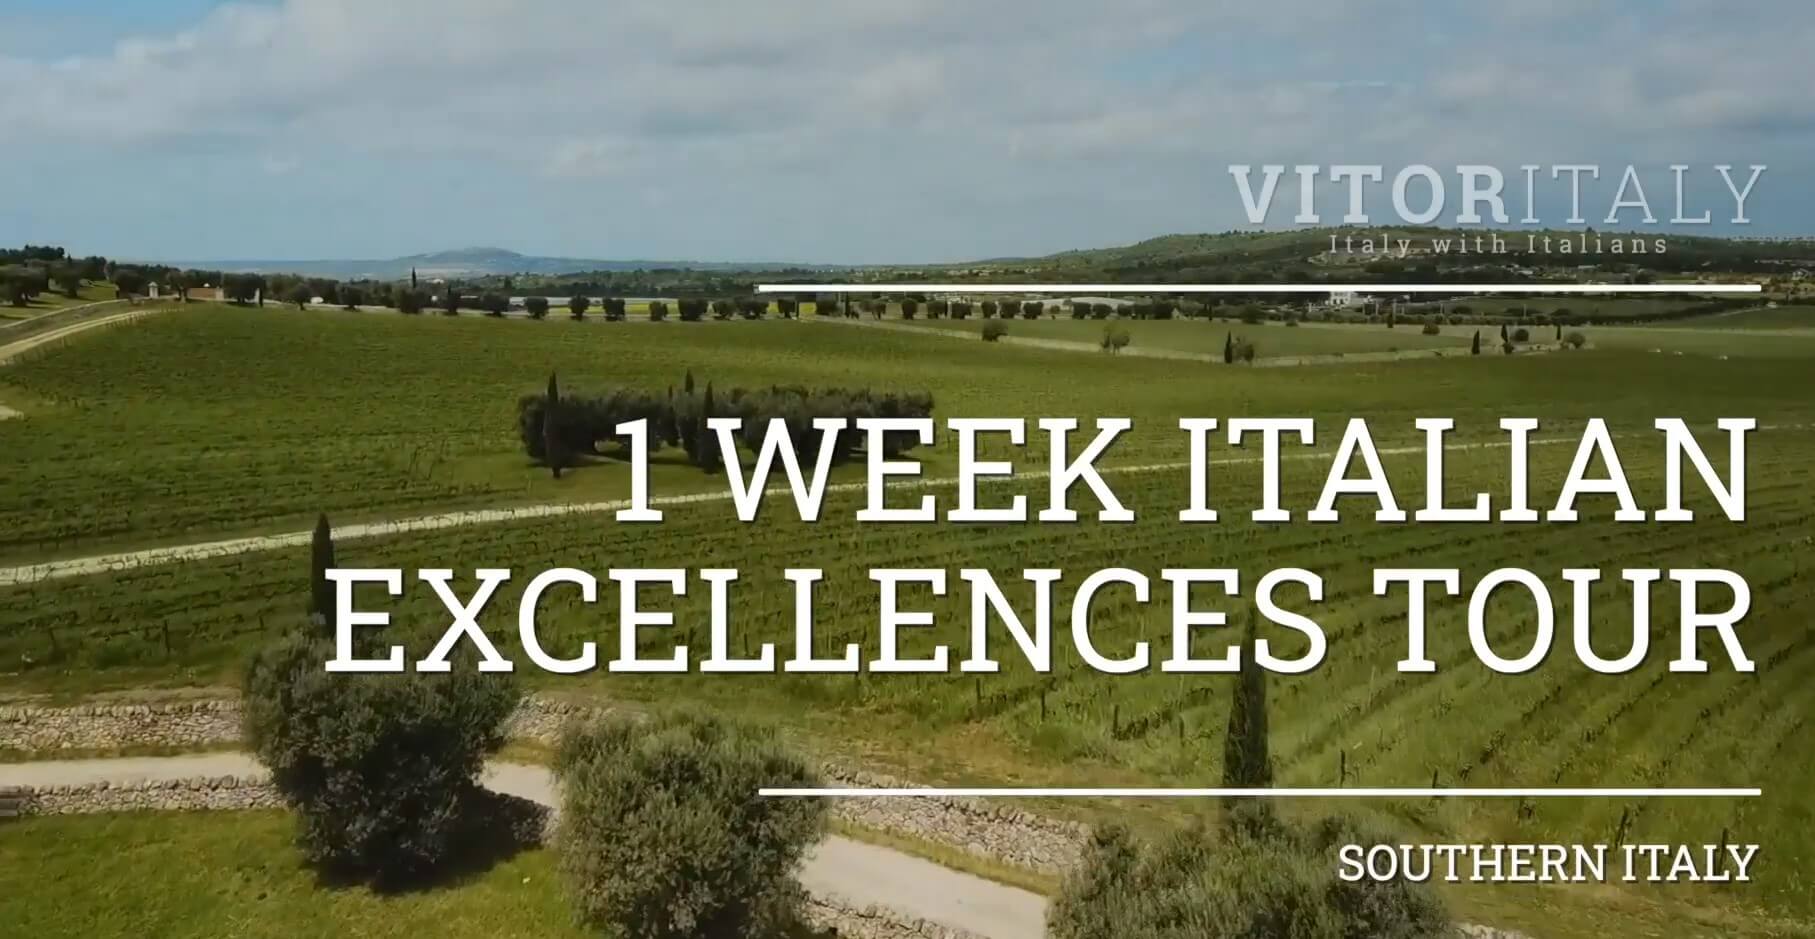 1-WEEK ITALIAN EXCELLENCES PRIVATE TOUR - SOUTHERN ITALY